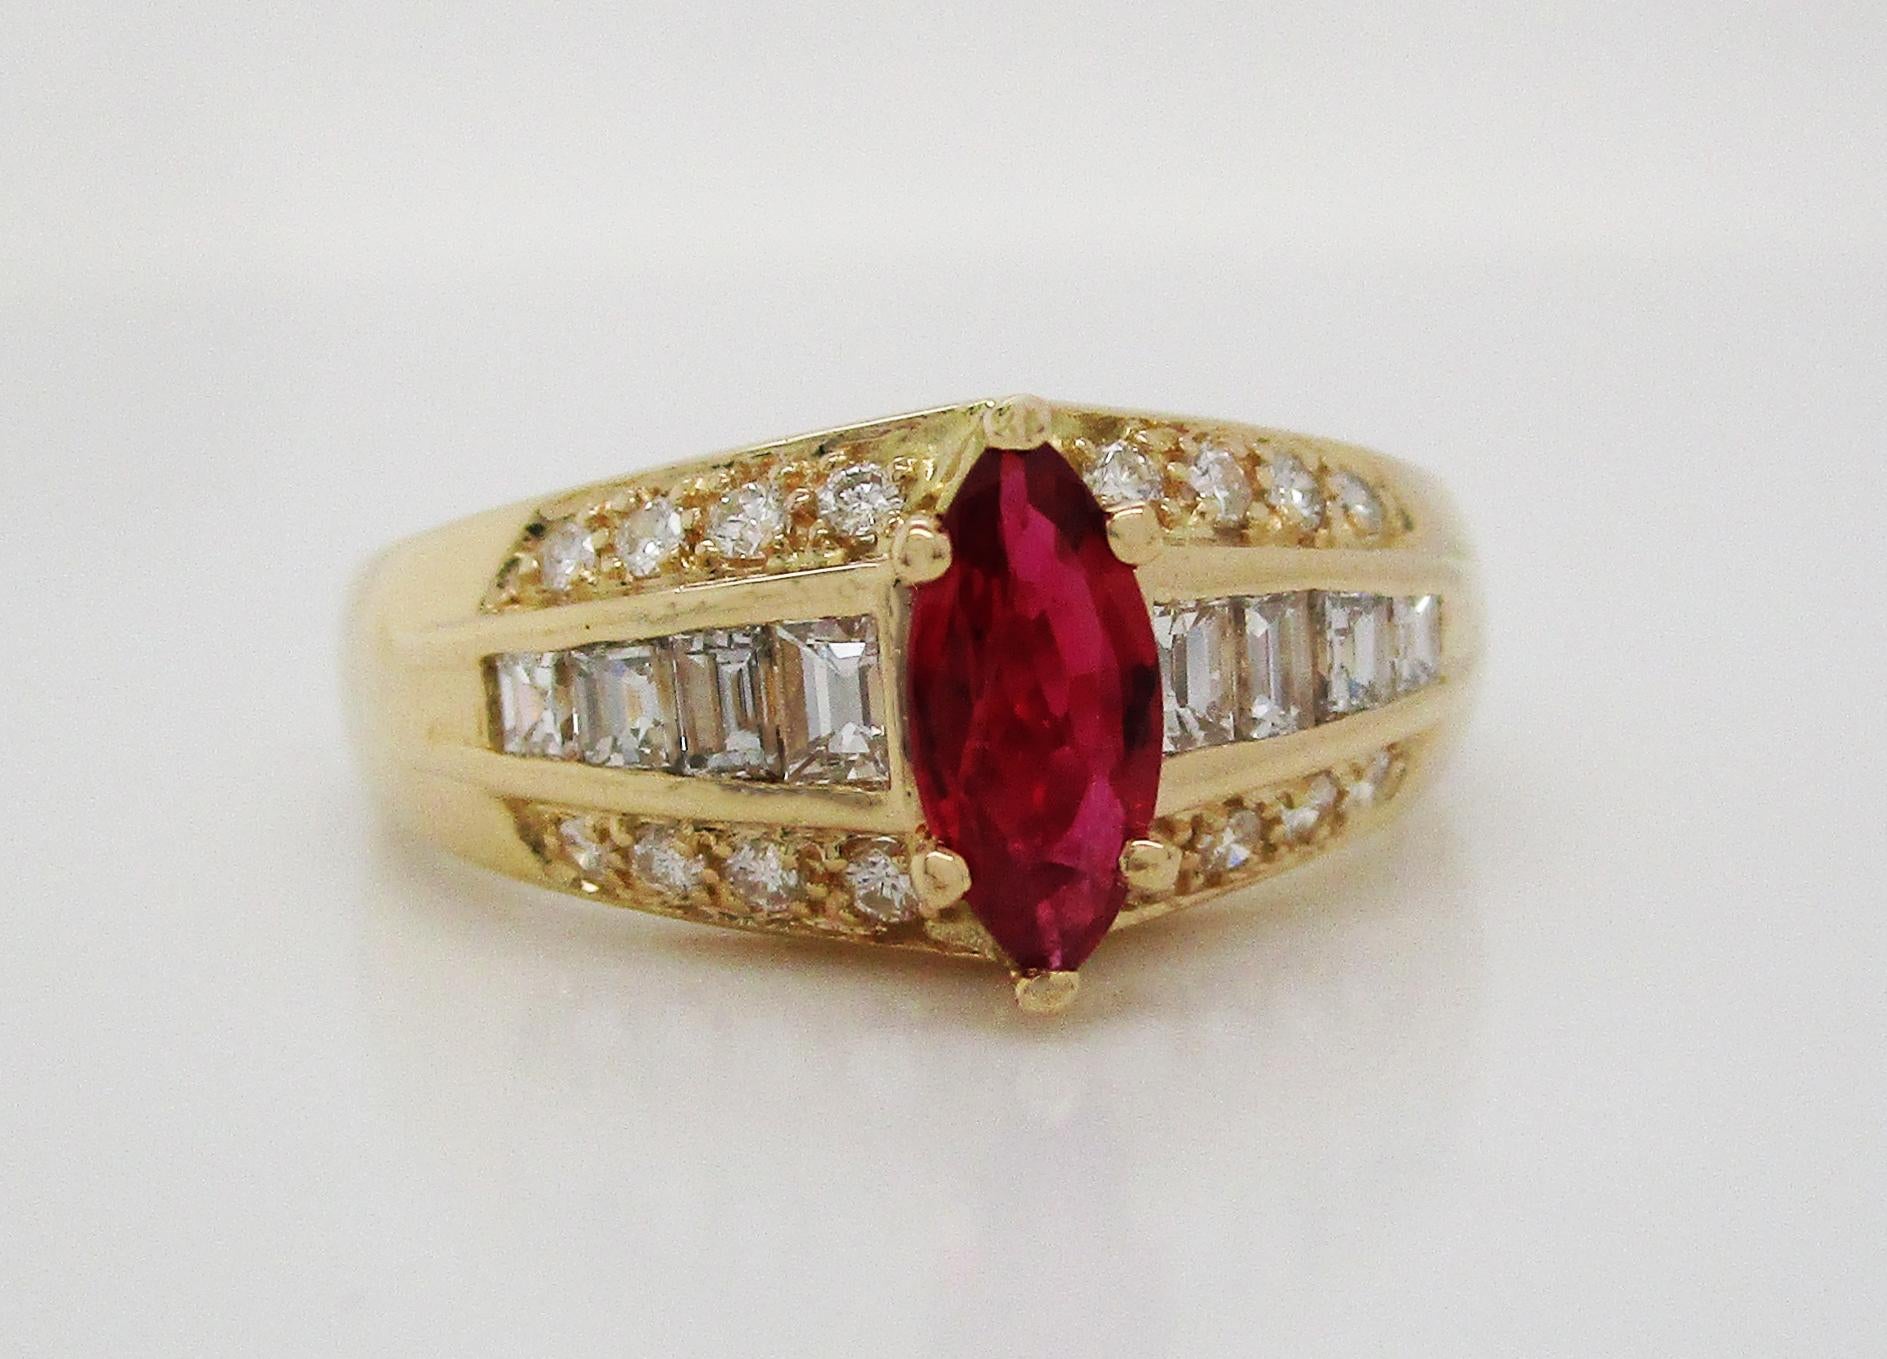 This remarkable mid-century ring is in 14k yellow gold and is set with three rows of stunning diamonds and a gorgeous deep red marquise ruby center stone. The ring features a graduated center row of baguette diamonds, on either side of the ruby